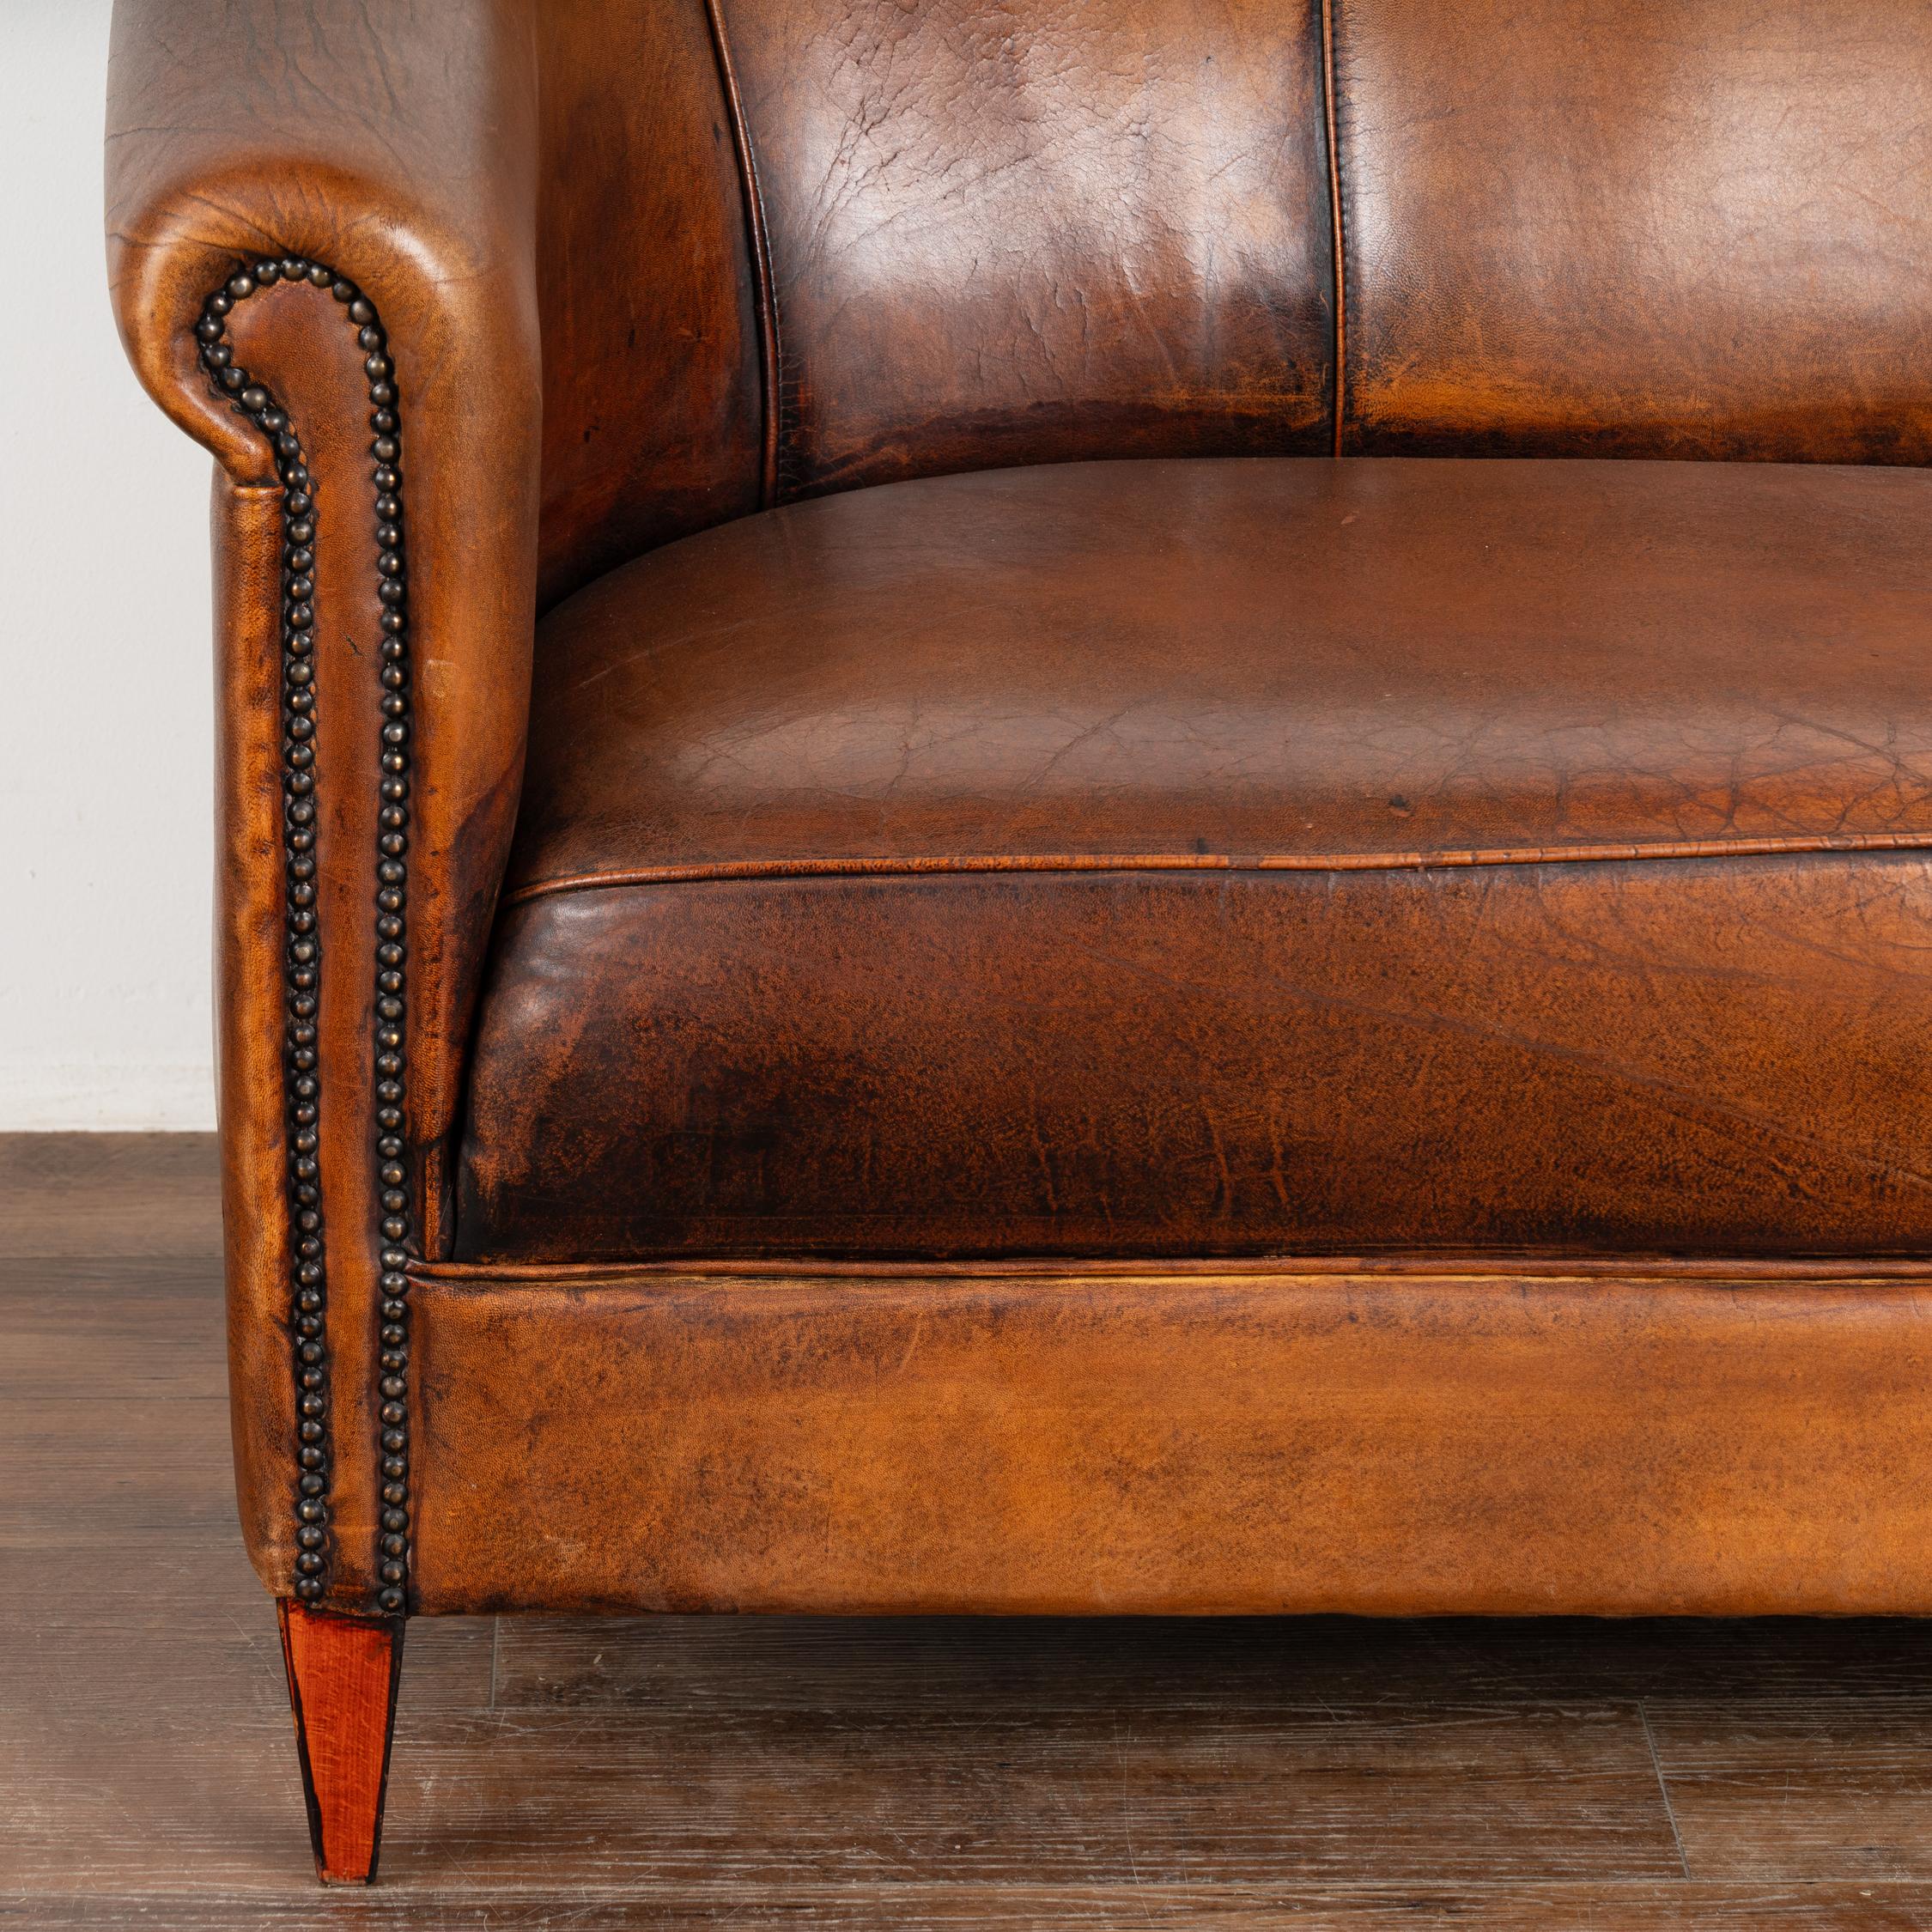 Vintage Brown Leather 2-Seat Sofa Loveseat from The Netherlands, circa 1960-70 1